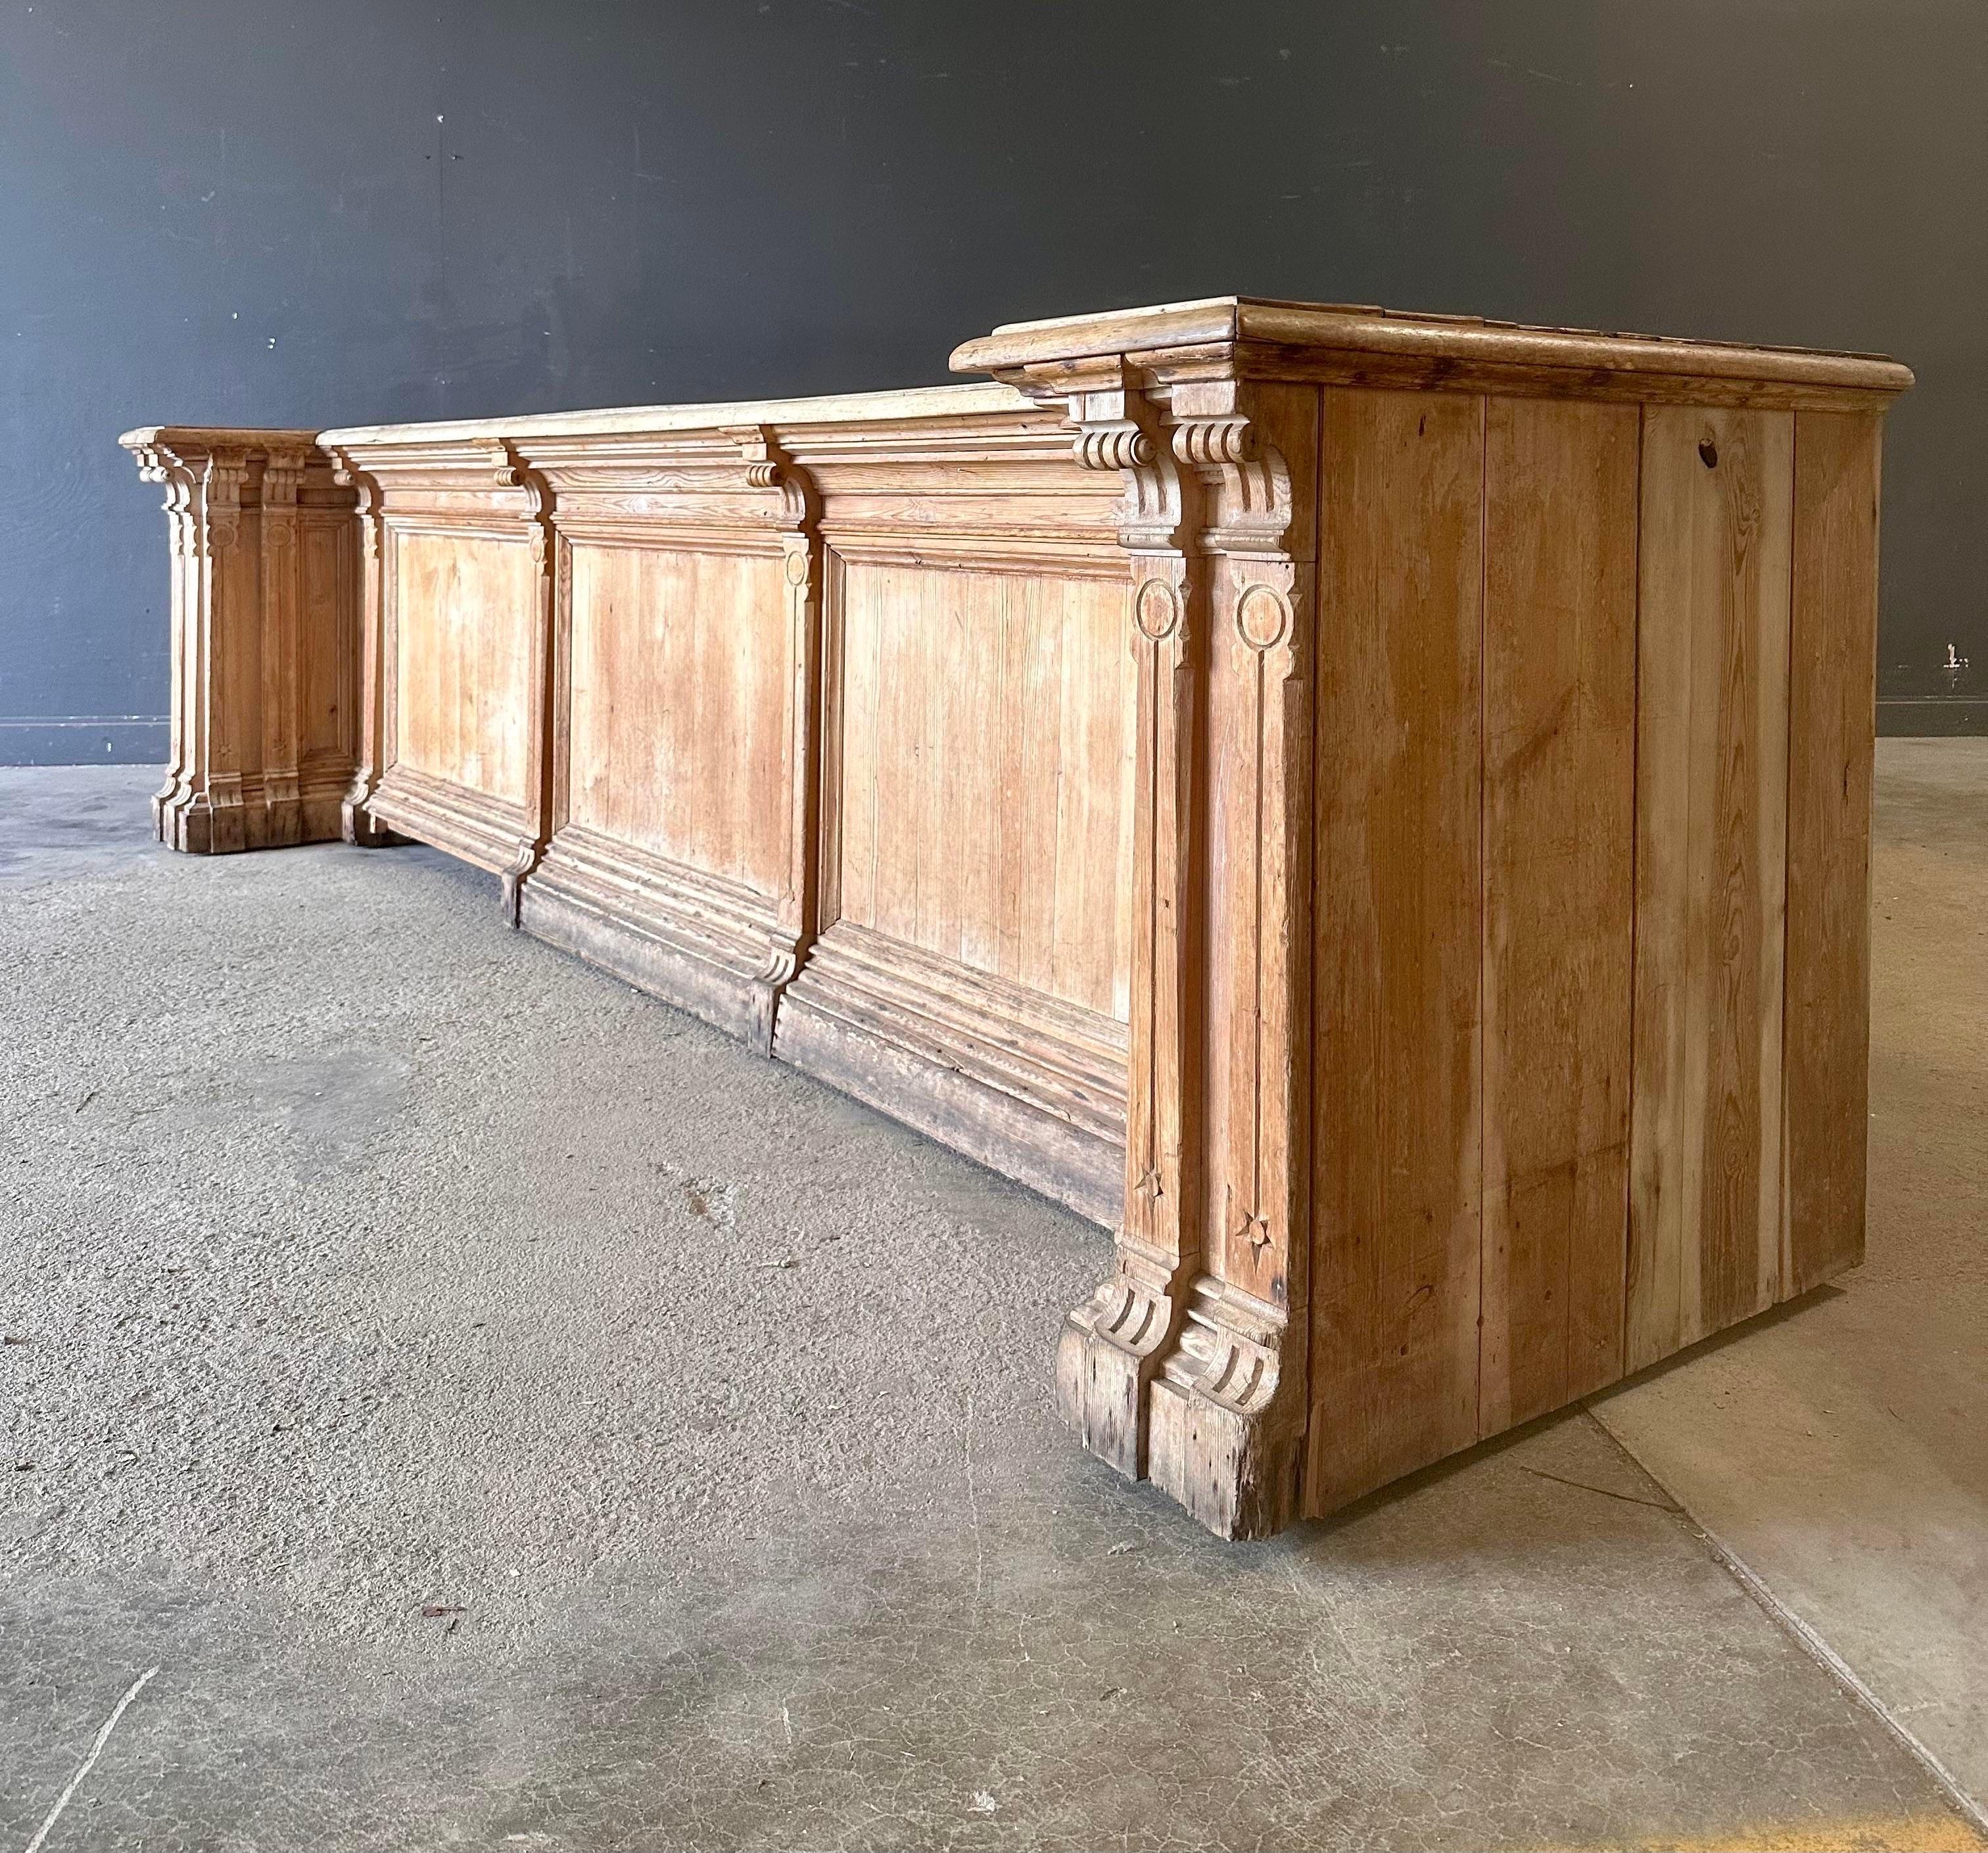 A monumental antique carved wooden bar, originally a store counter. Made of solid wood with carved columns. In the back is a lot of storage and several drawers. Truly a statement piece.